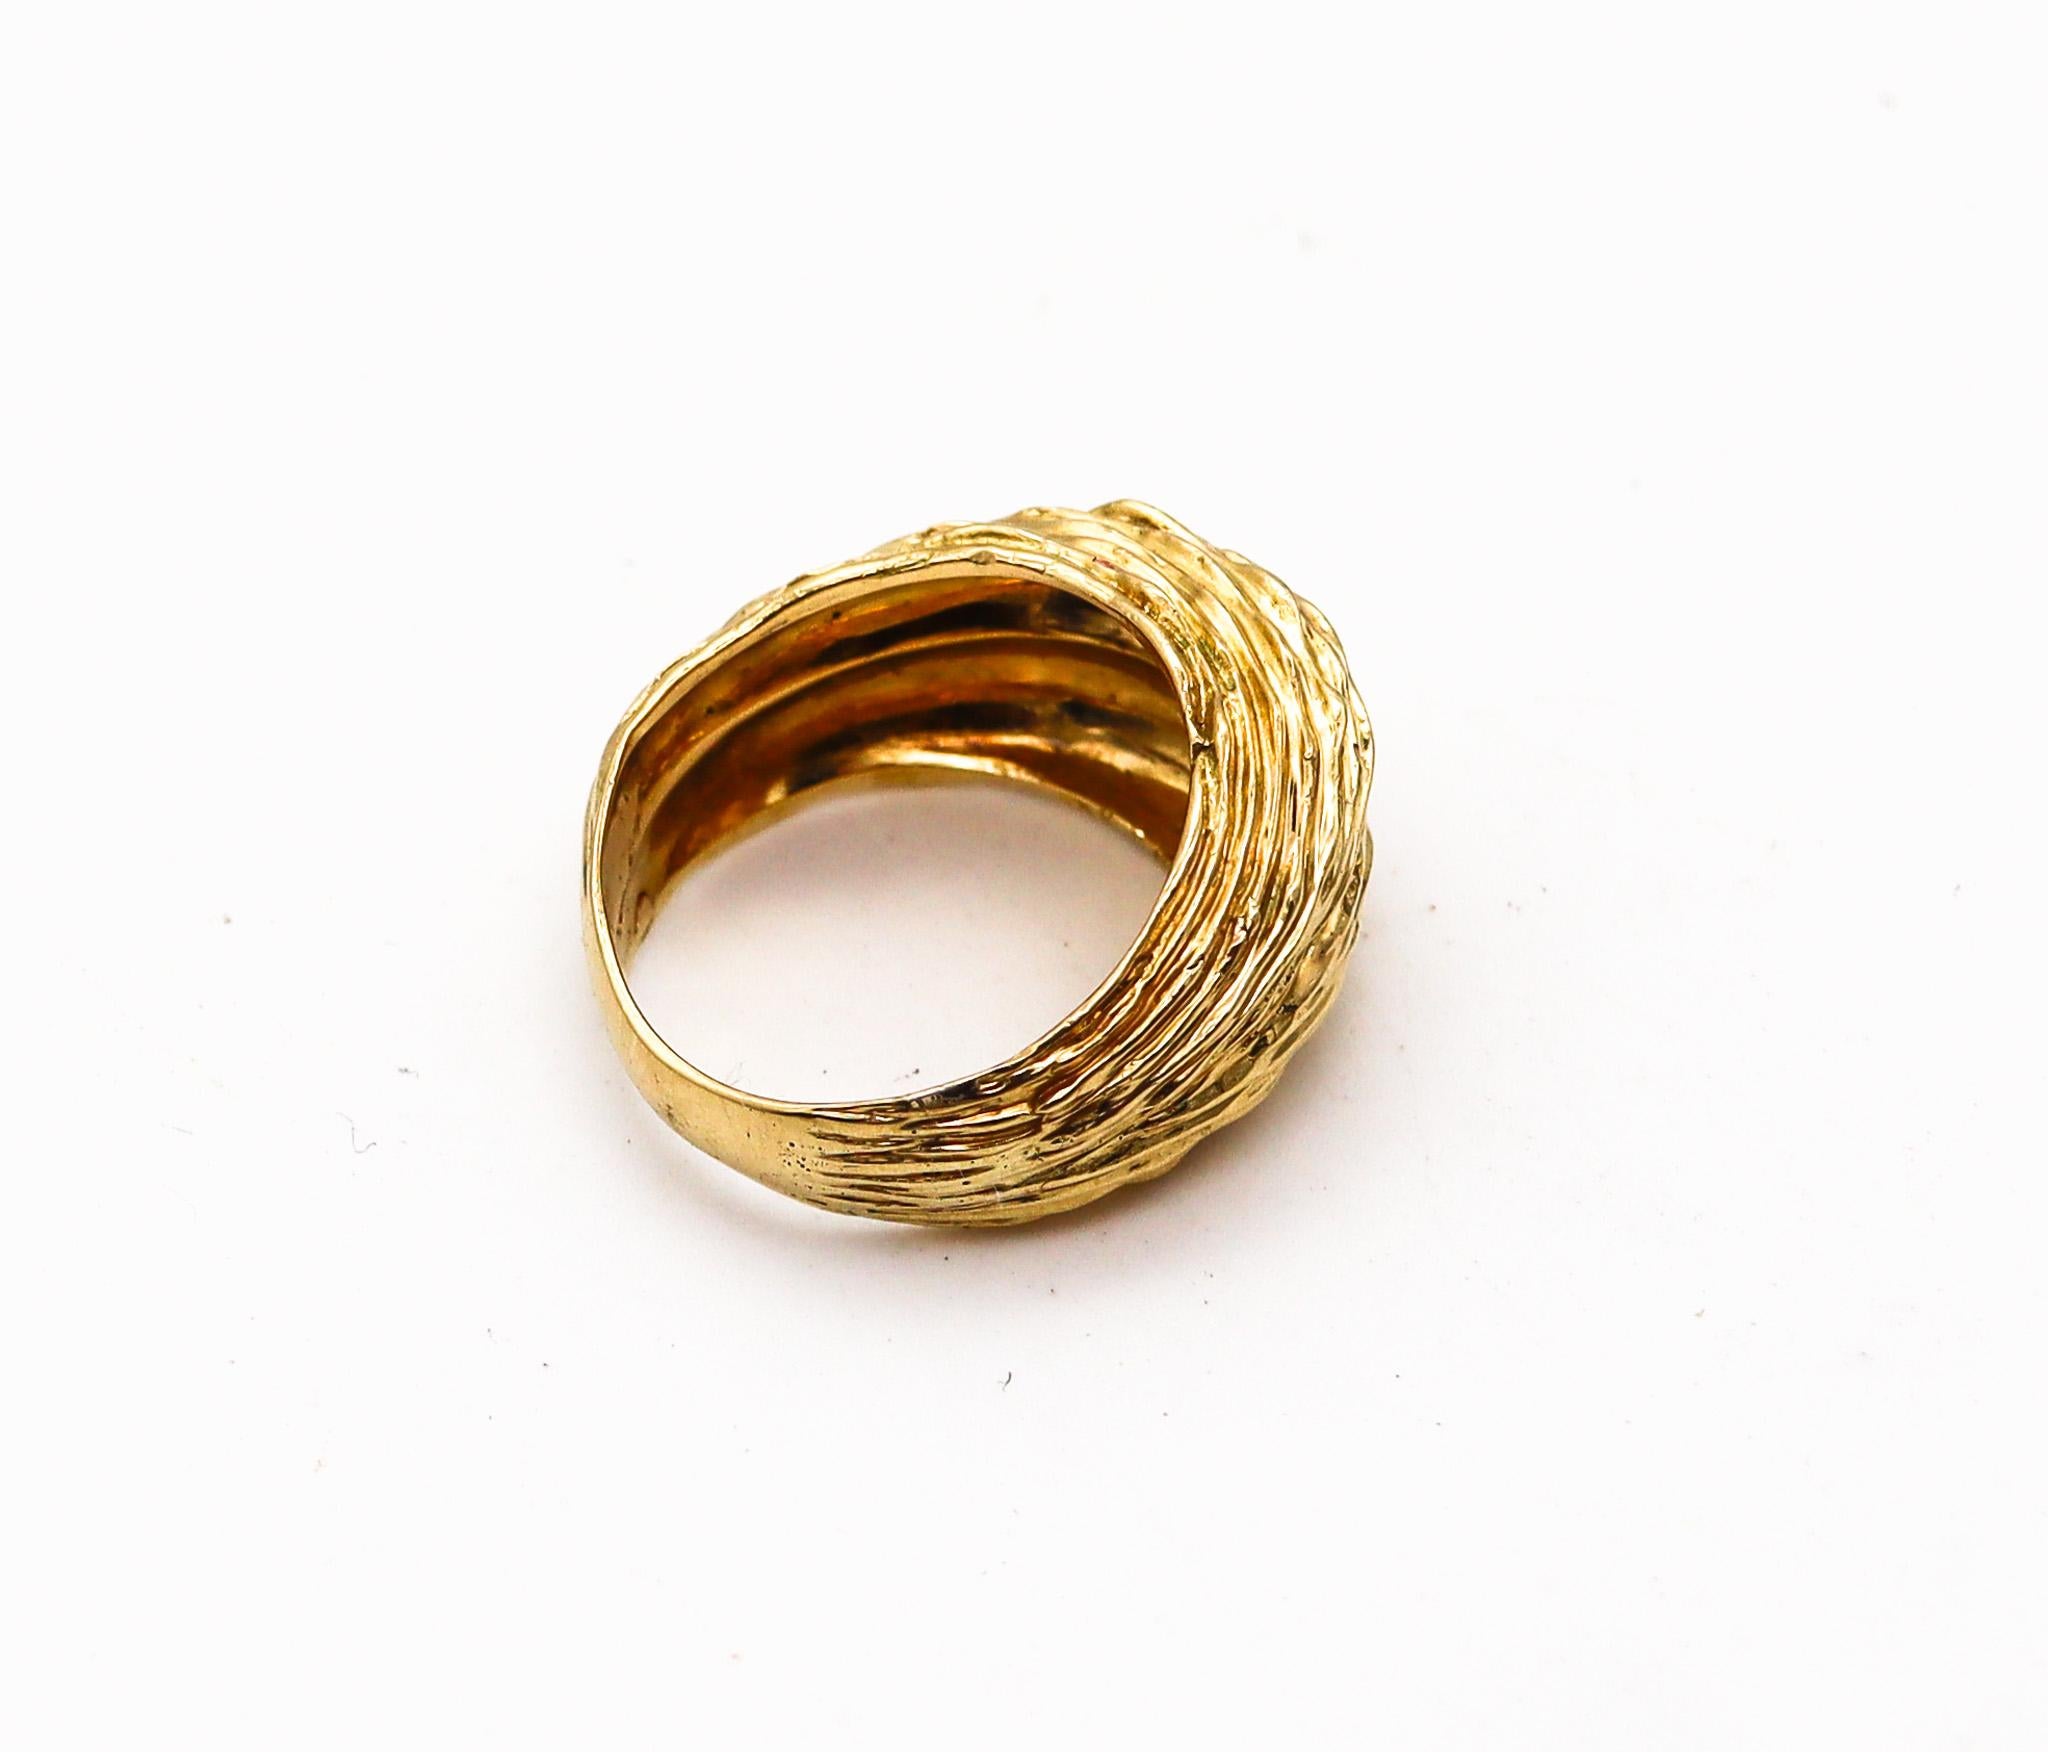 Van Cleef & Arpels 1970 Textured Cocktail Ring in Solid 18Kt Yellow Gold 1